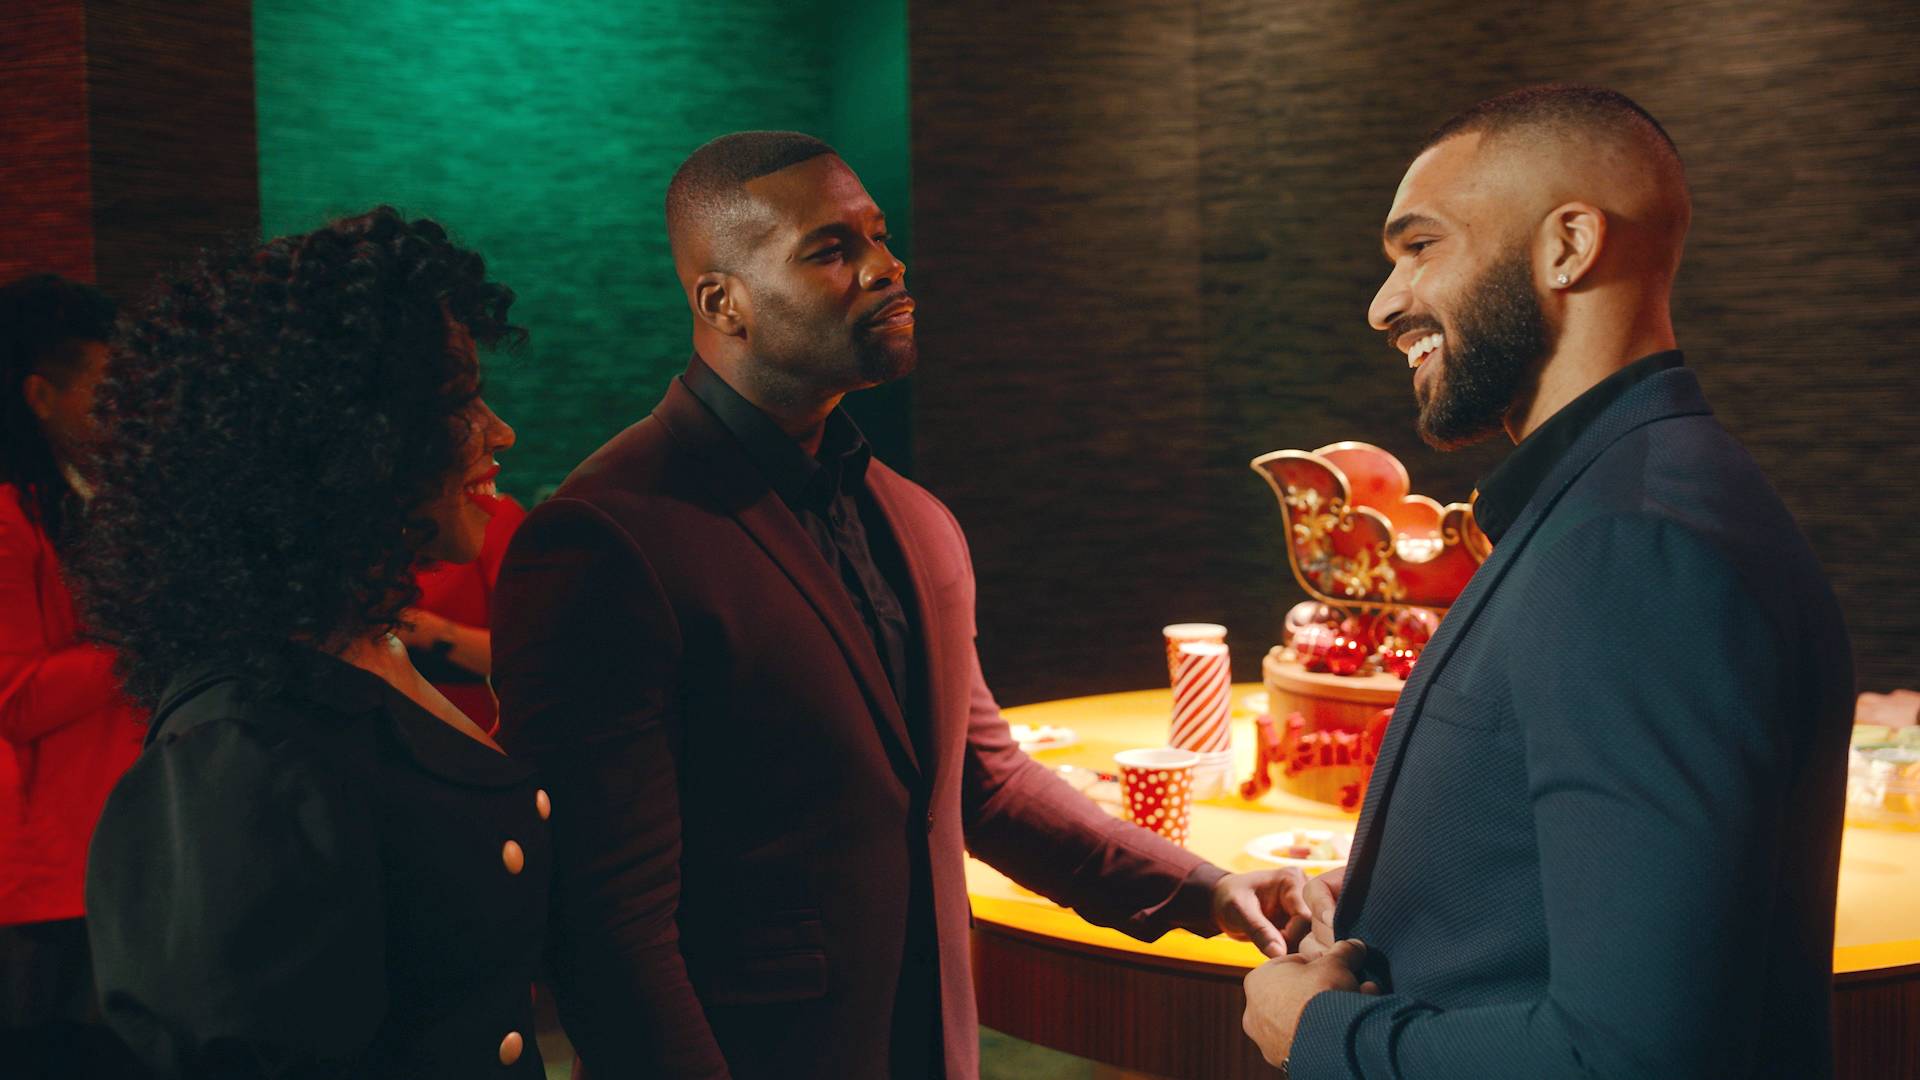 Still of  KJ Smith as Billie, Amin Joseph as David, and Tyler Lepley as Micah from BET's "Tales" episode 209 - Ex Factor. (Photo: BET)